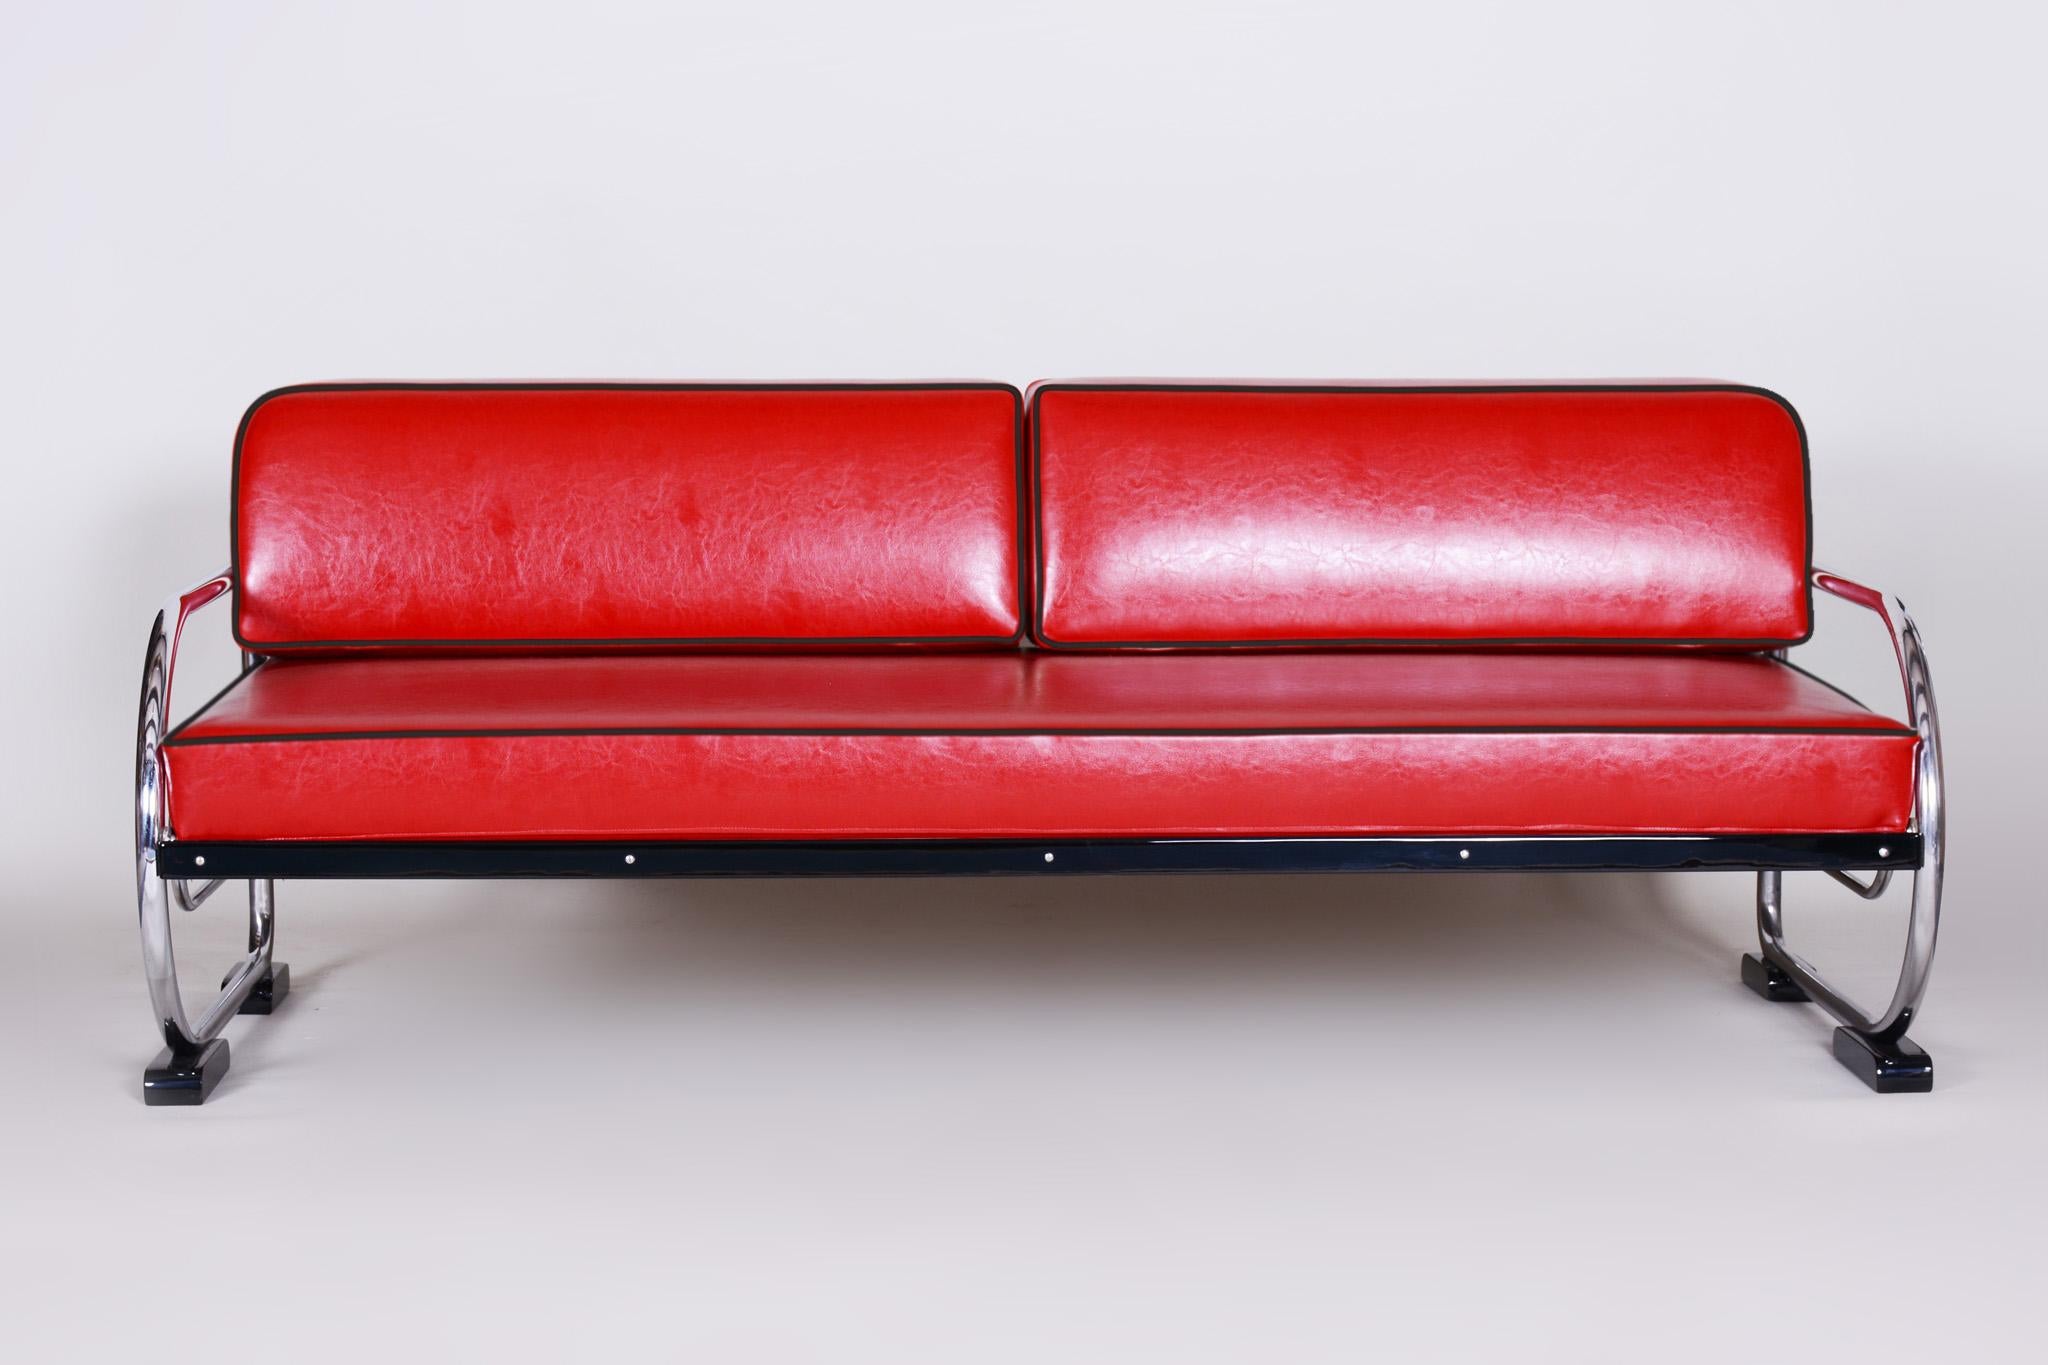 Bauhaus style sofa with a lacquered wood and chrome tubular steel frame.
Manufactured by Robert Slezák in the 1930s.
Chrome tubular steel is in perfect original condition.
Upholstered to high quality red leather.
Source: Czechia (Czechoslovakia).